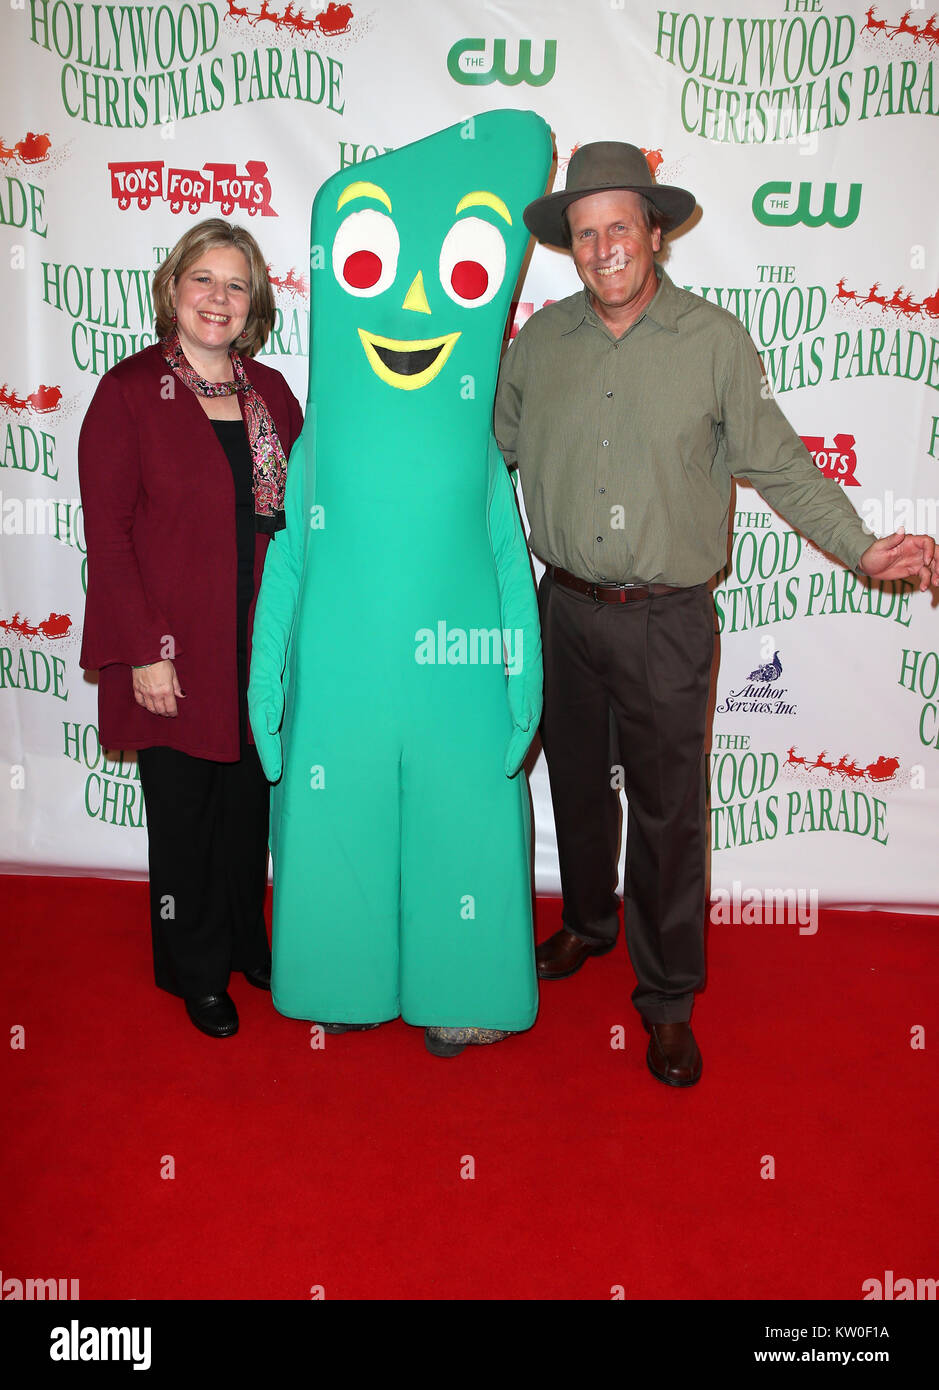 86th Annual Hollywood Christmas Parade in Los Angeles, California.  Featuring: Joan Clokey, Gumby, Joe Clokey Where: Los Angeles, California, United States When: 26 Nov 2017 Credit: FayesVision/WENN.com Stock Photo